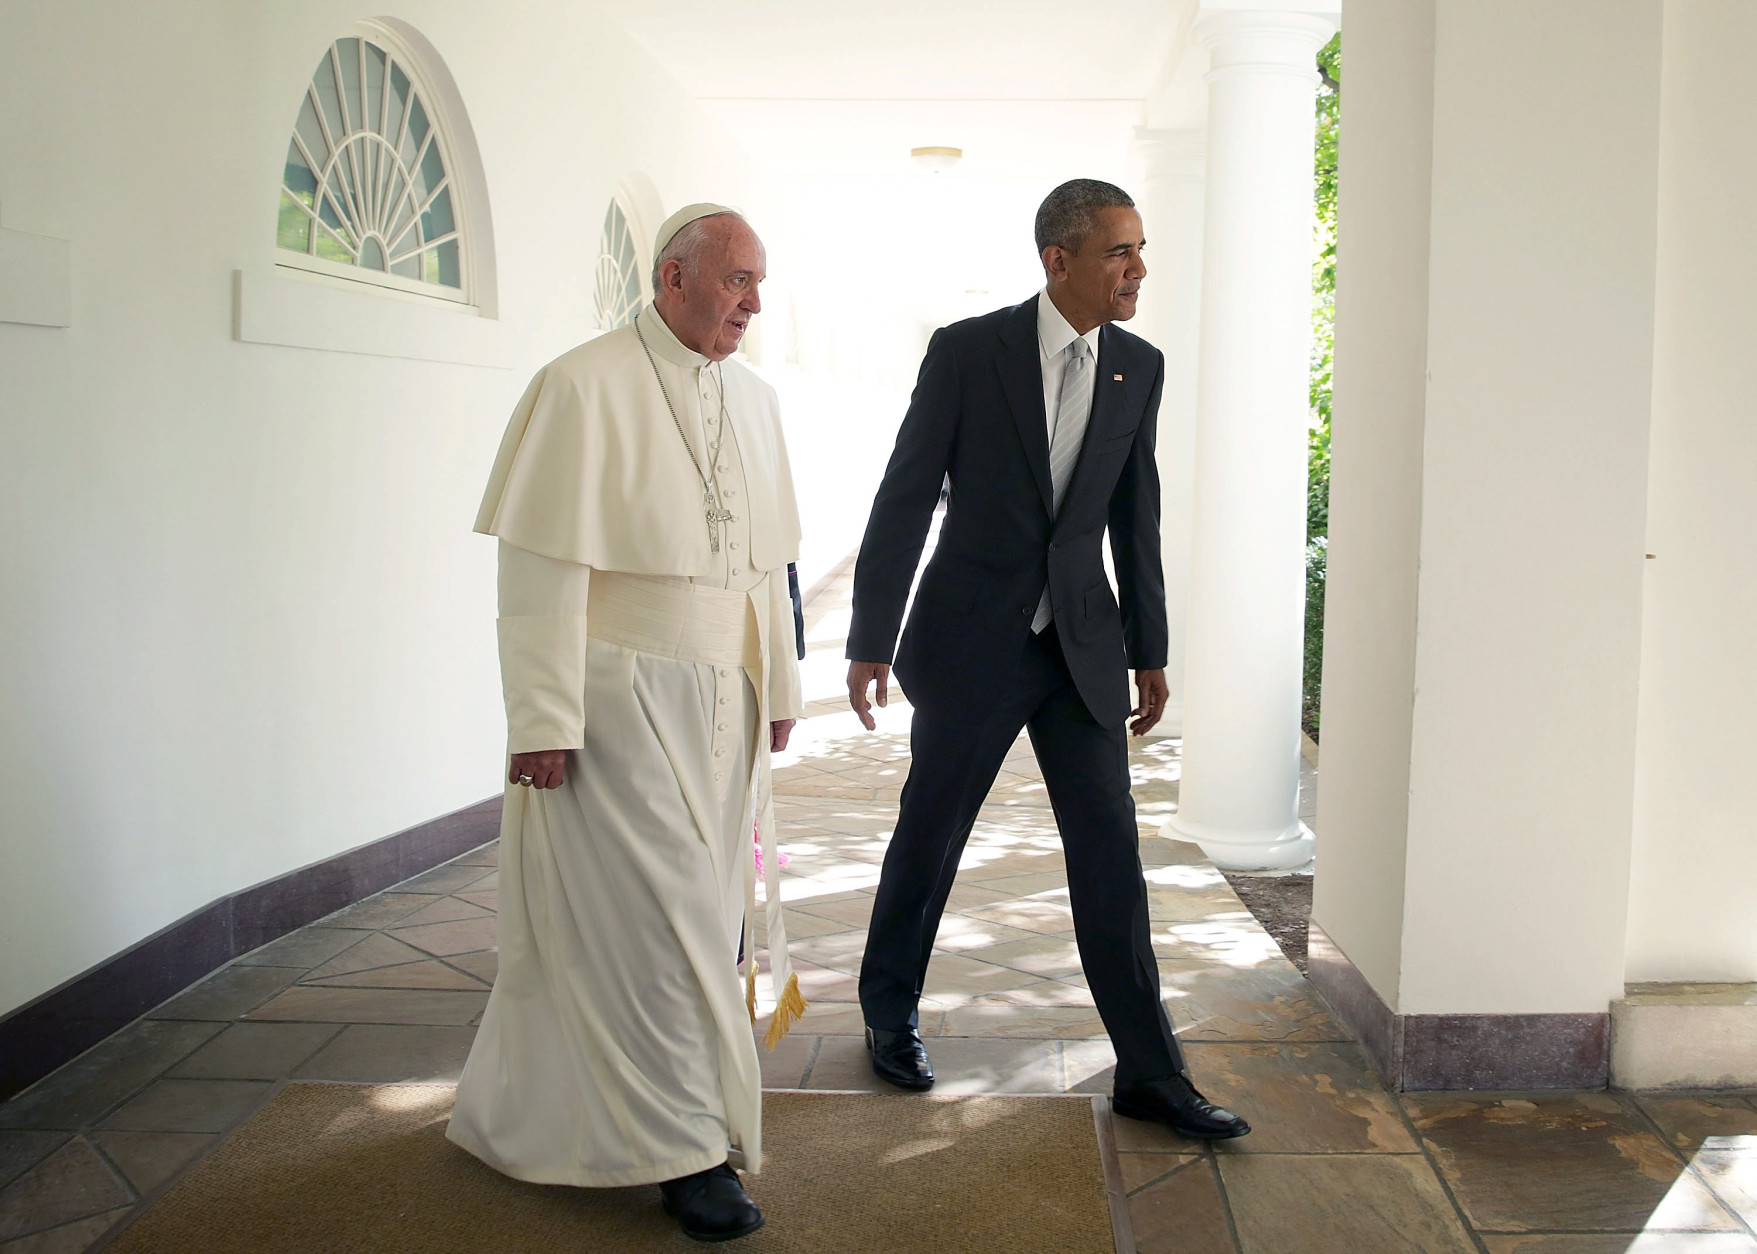 WASHINGTON, DC - SEPTEMBER 23:  U.S. President Barack Obama (R) and Pope Francis (L) walk through the colonnade prior to an Oval Office meeting at the White House on September 23, 2015 in Washington, DC. The Pope begins his first trip to the United States at the White House followed by a visit to St. Matthew's Cathedral, and will then hold a Mass on the grounds of the Basilica of the National Shrine of the Immaculate Conception.  (Photo by Alex Wong/Getty Images)